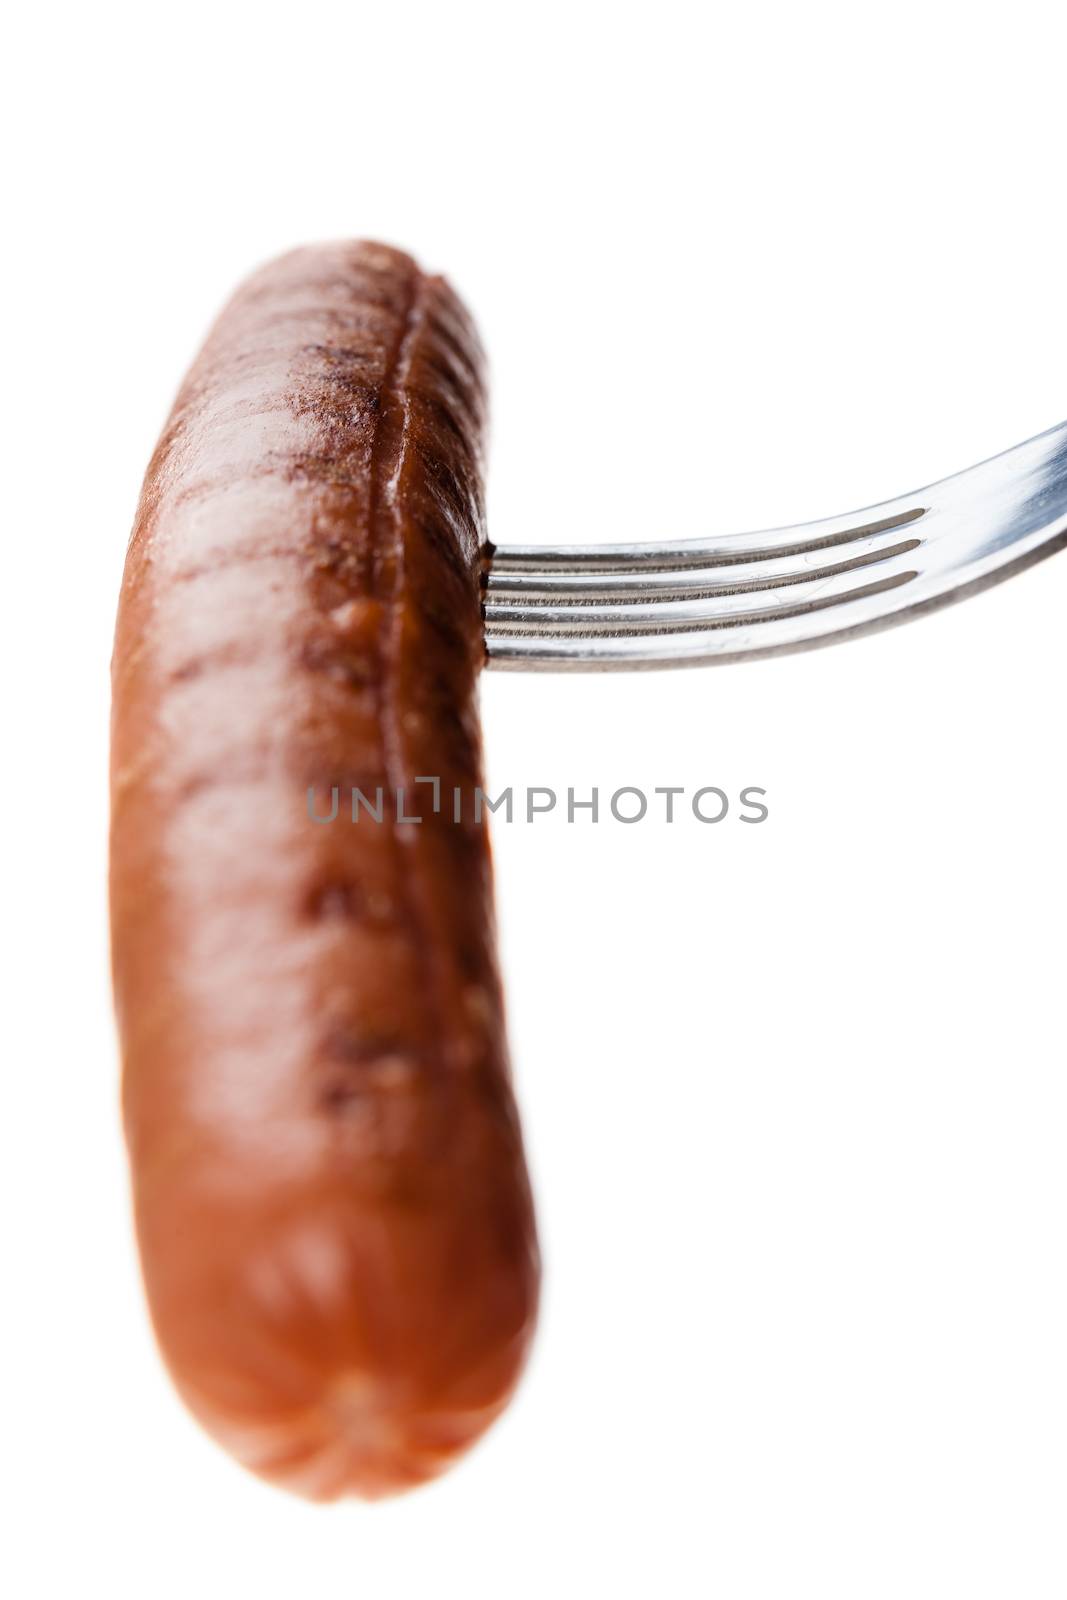 a delicious sausage on a fork over white